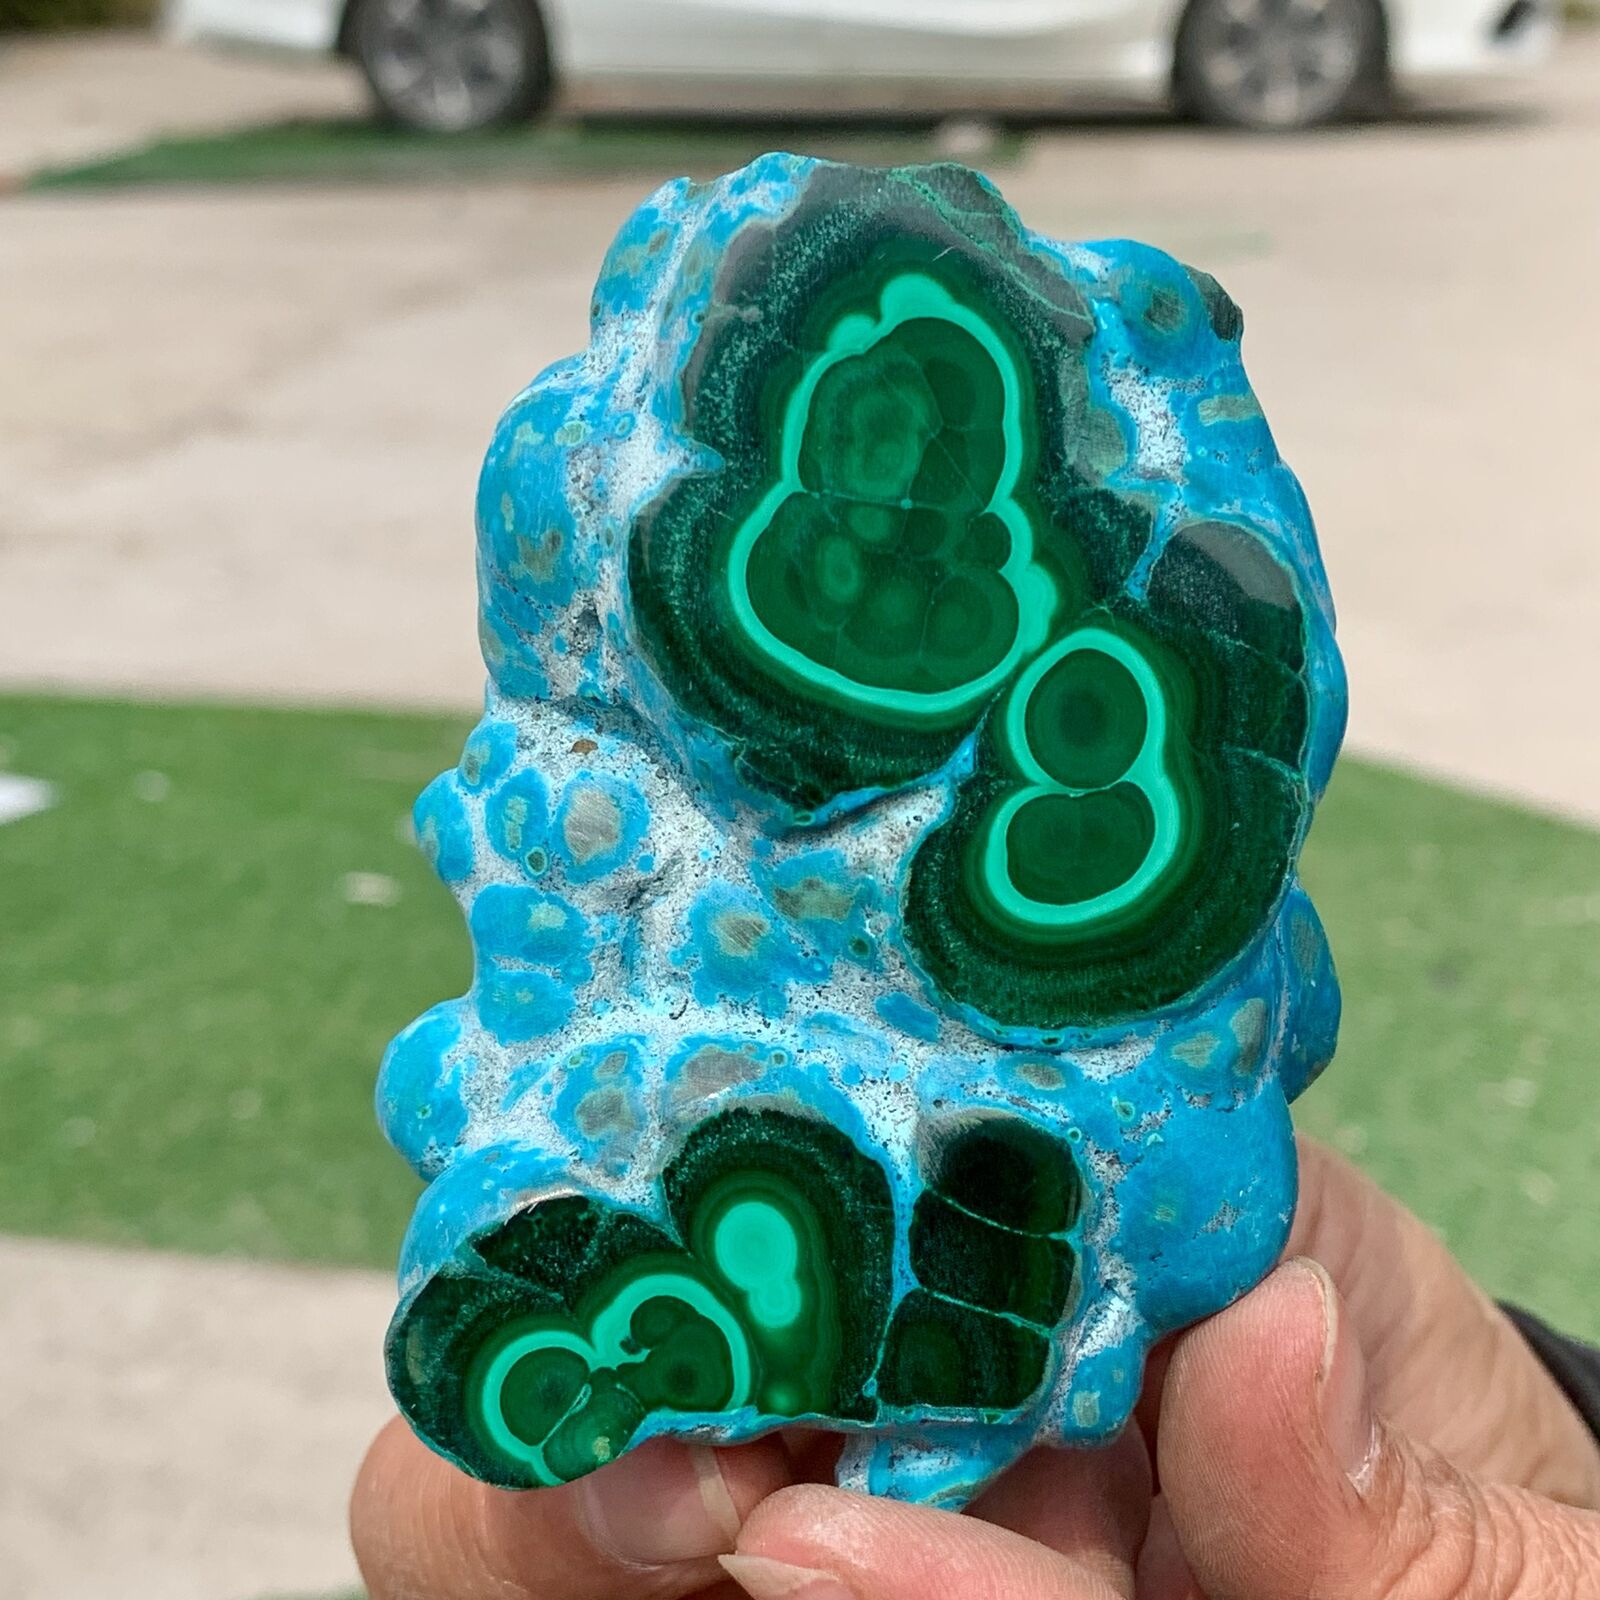 210G Natural Chrysocolla/Malachite transparent cluster rough mineral sample